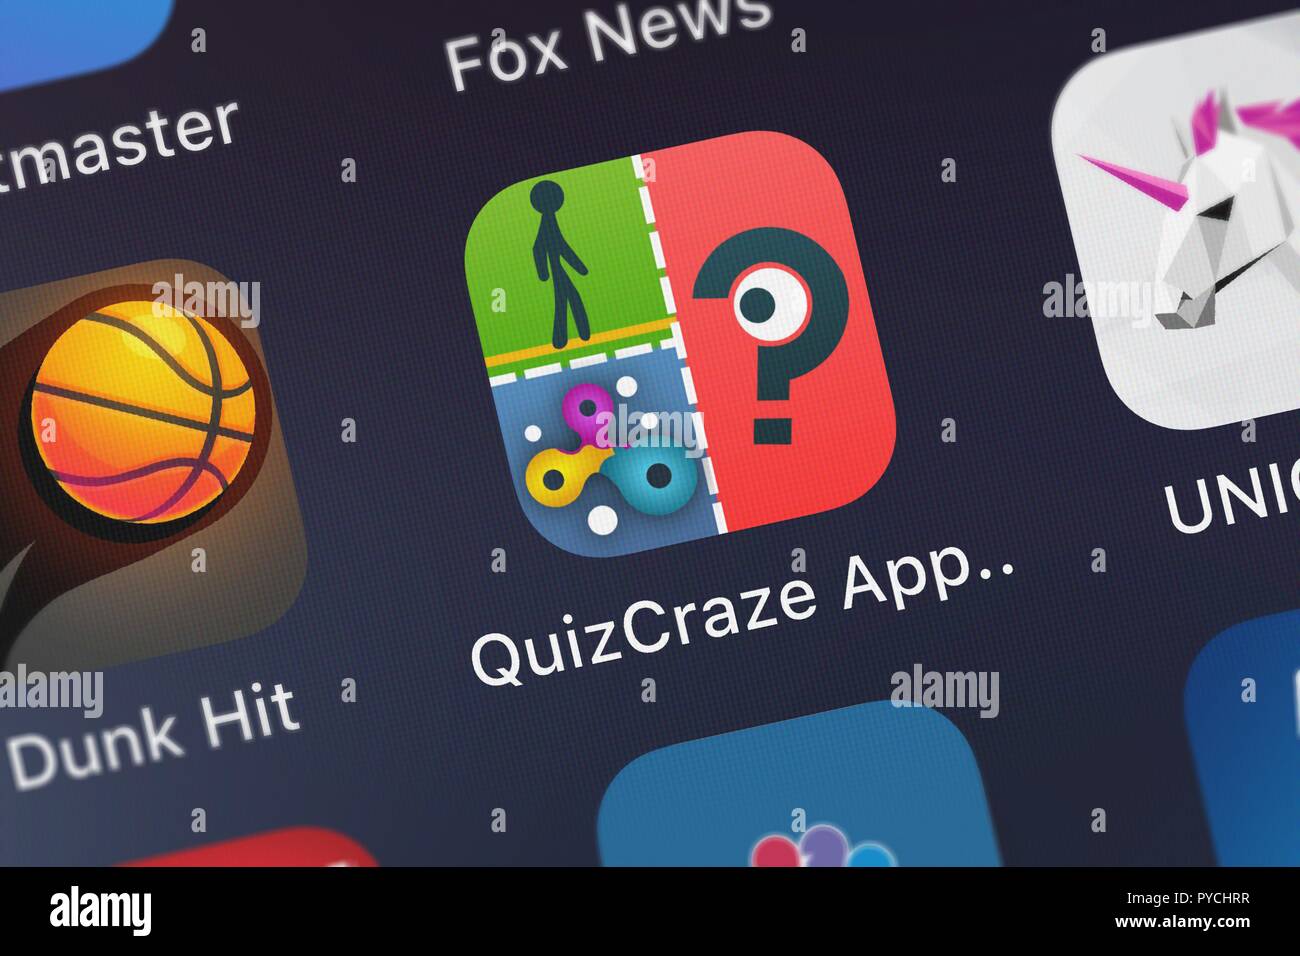 London United Kingdom October 26 2018 The Quizcraze App Logos Trivia Game Quiz Mobile App From Vzo Entertainment On An Iphone Screen Stock Photo Alamy